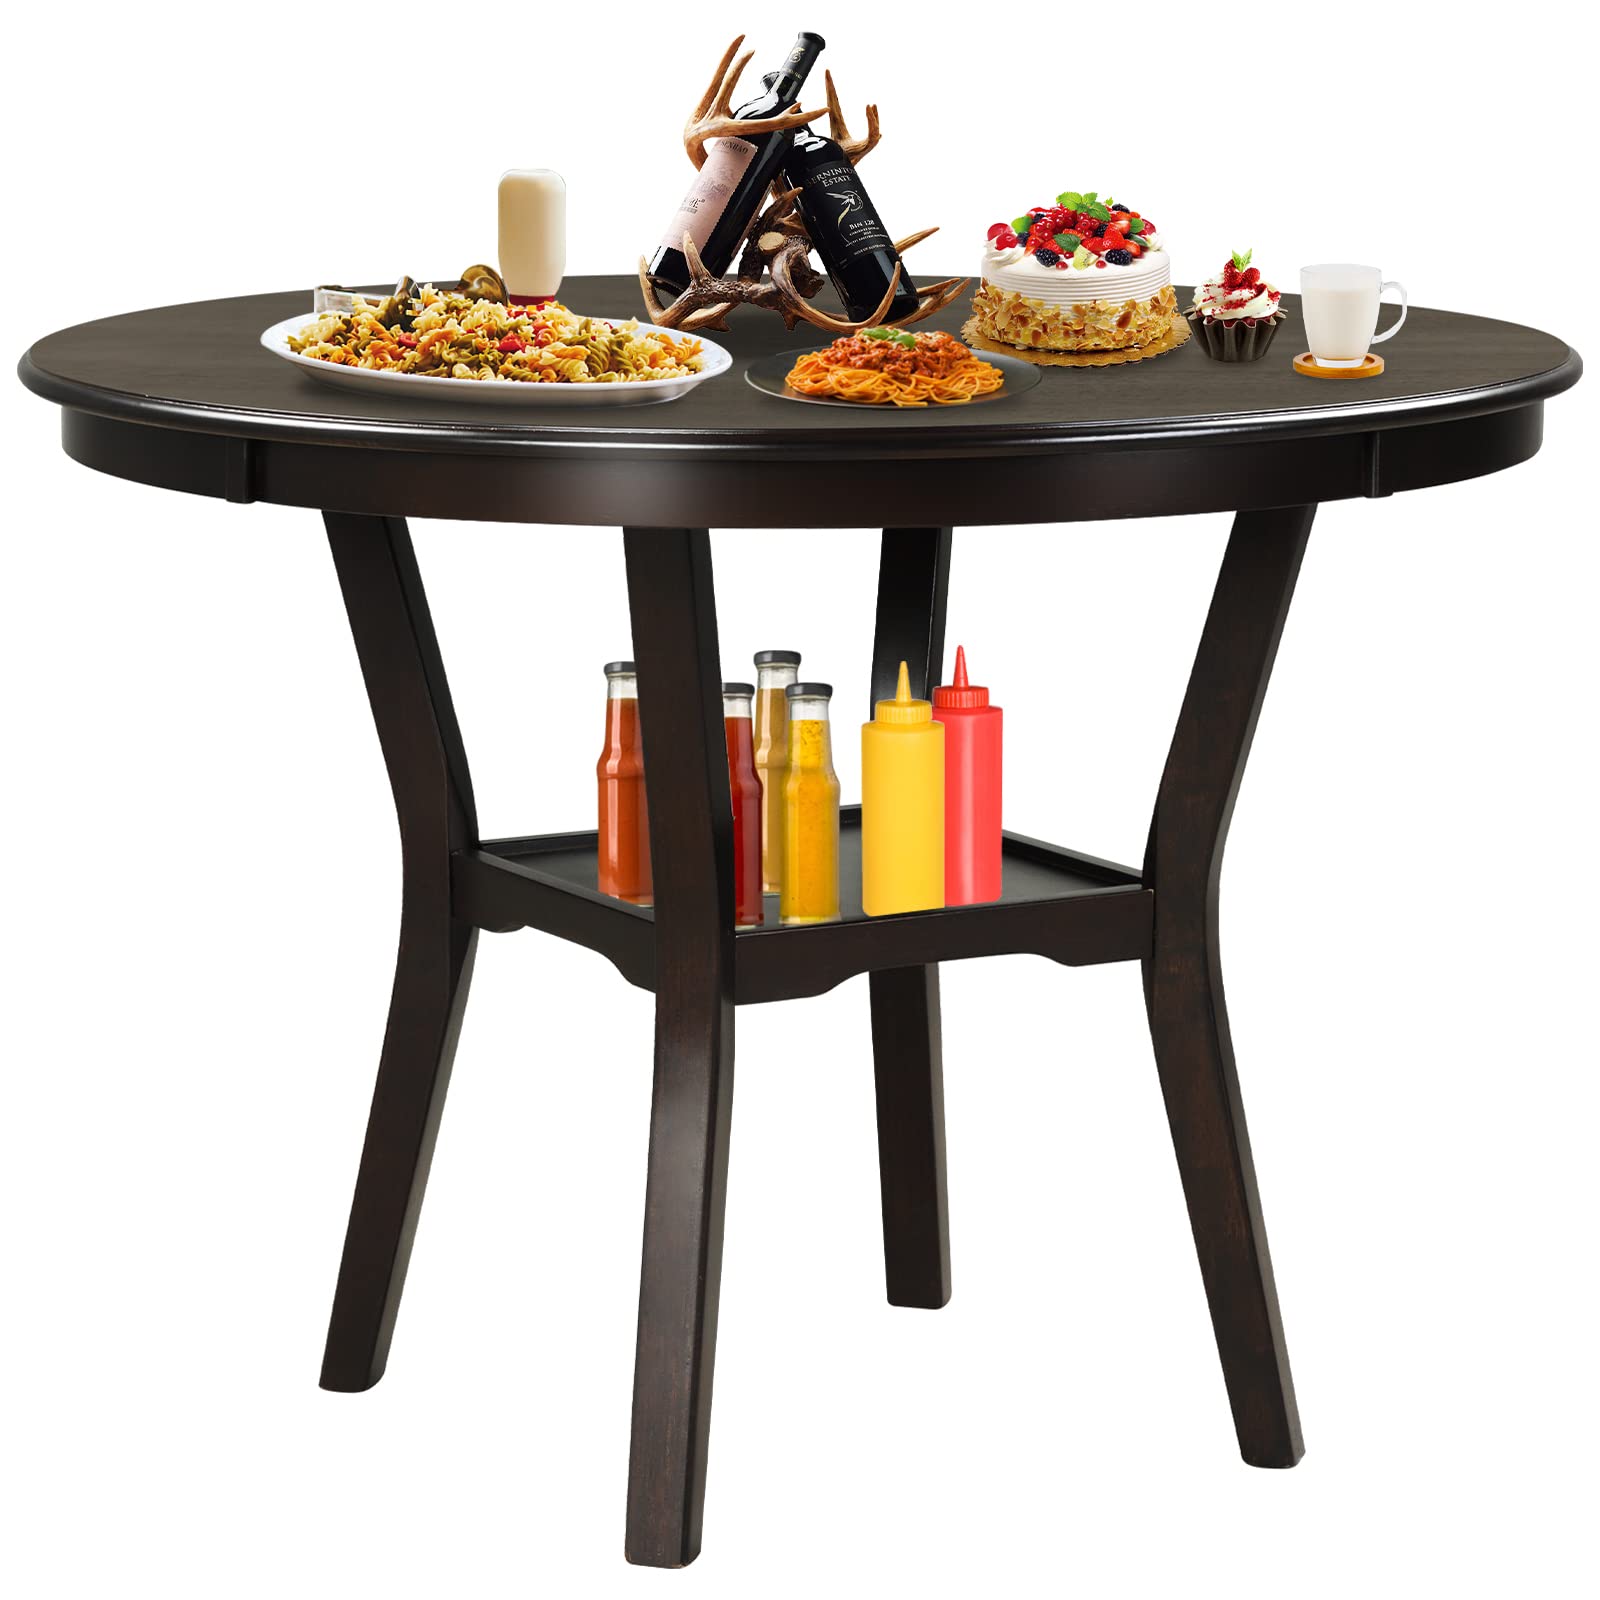 Giantex Round Dining Table, 42 Inch Wood Farmhouse Kitchen Table with Storage Shelf